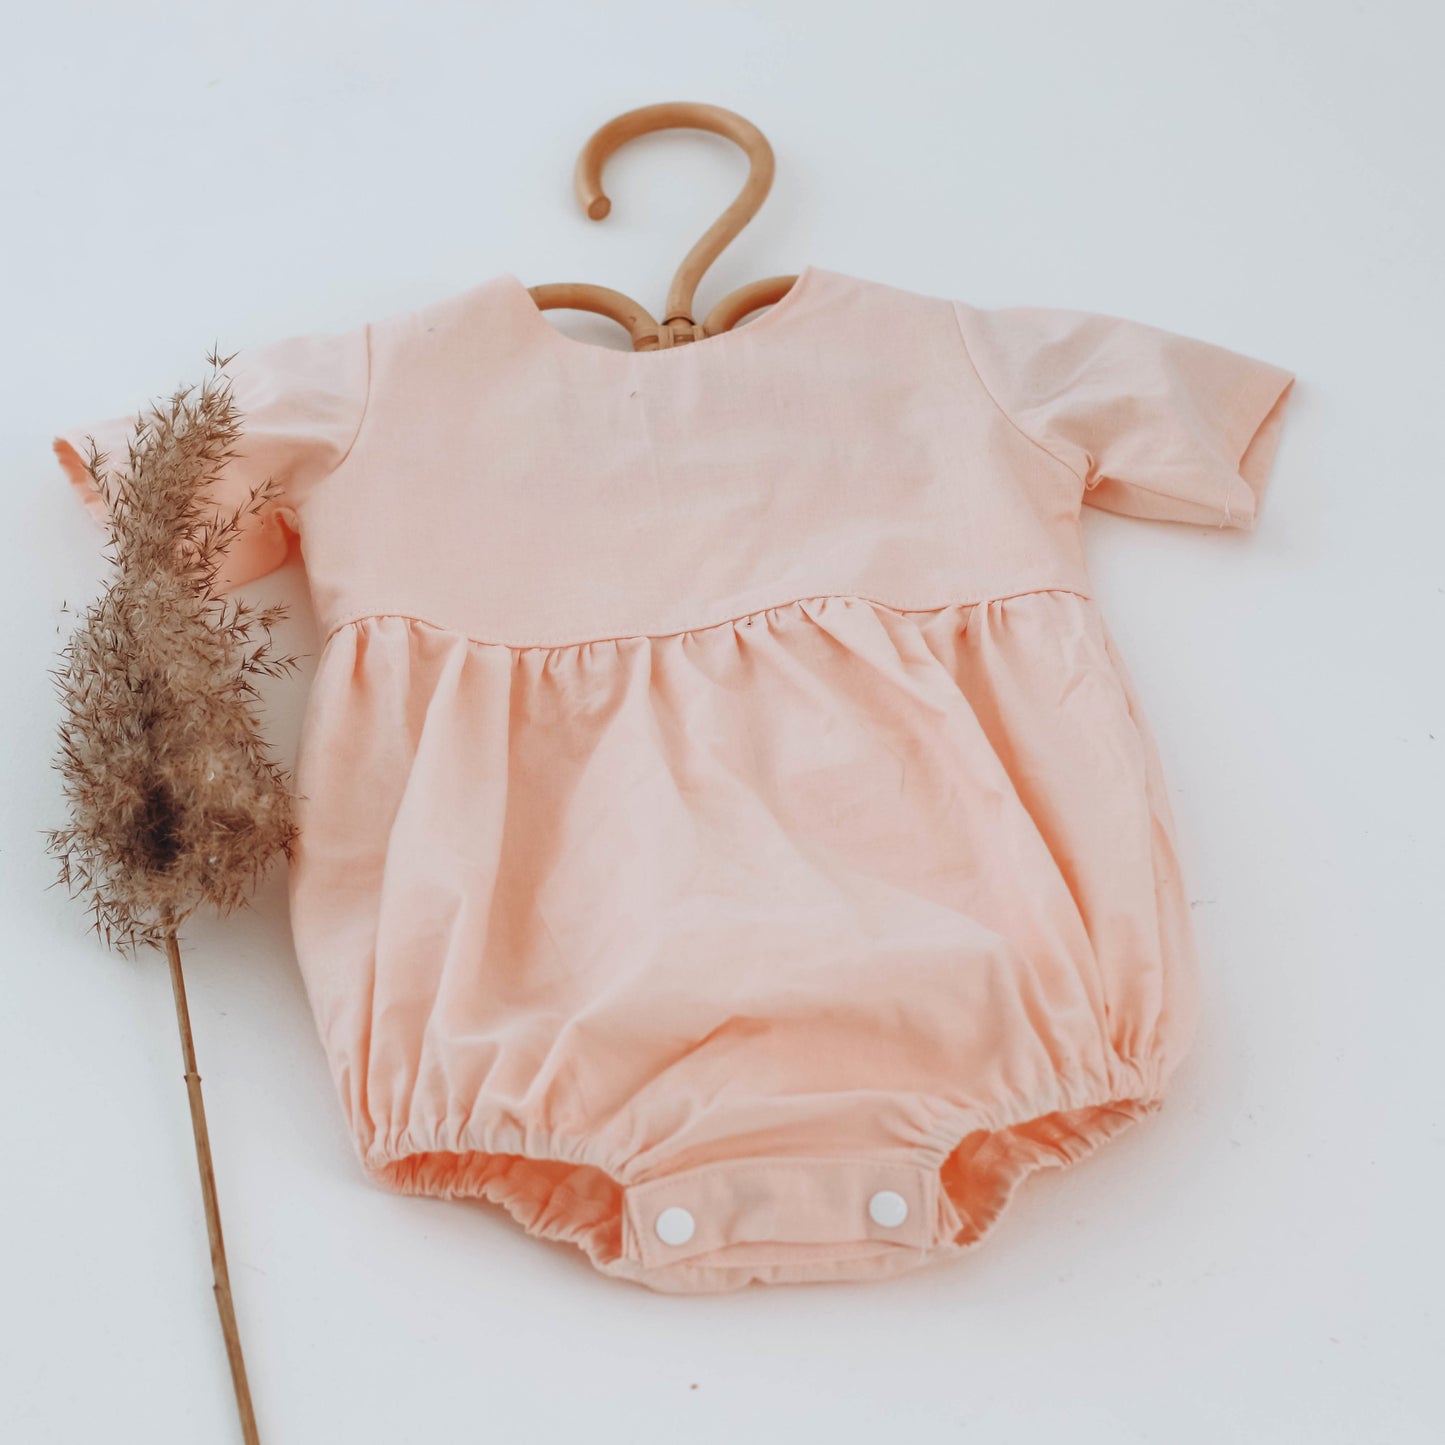 Peach romper with short sleeves